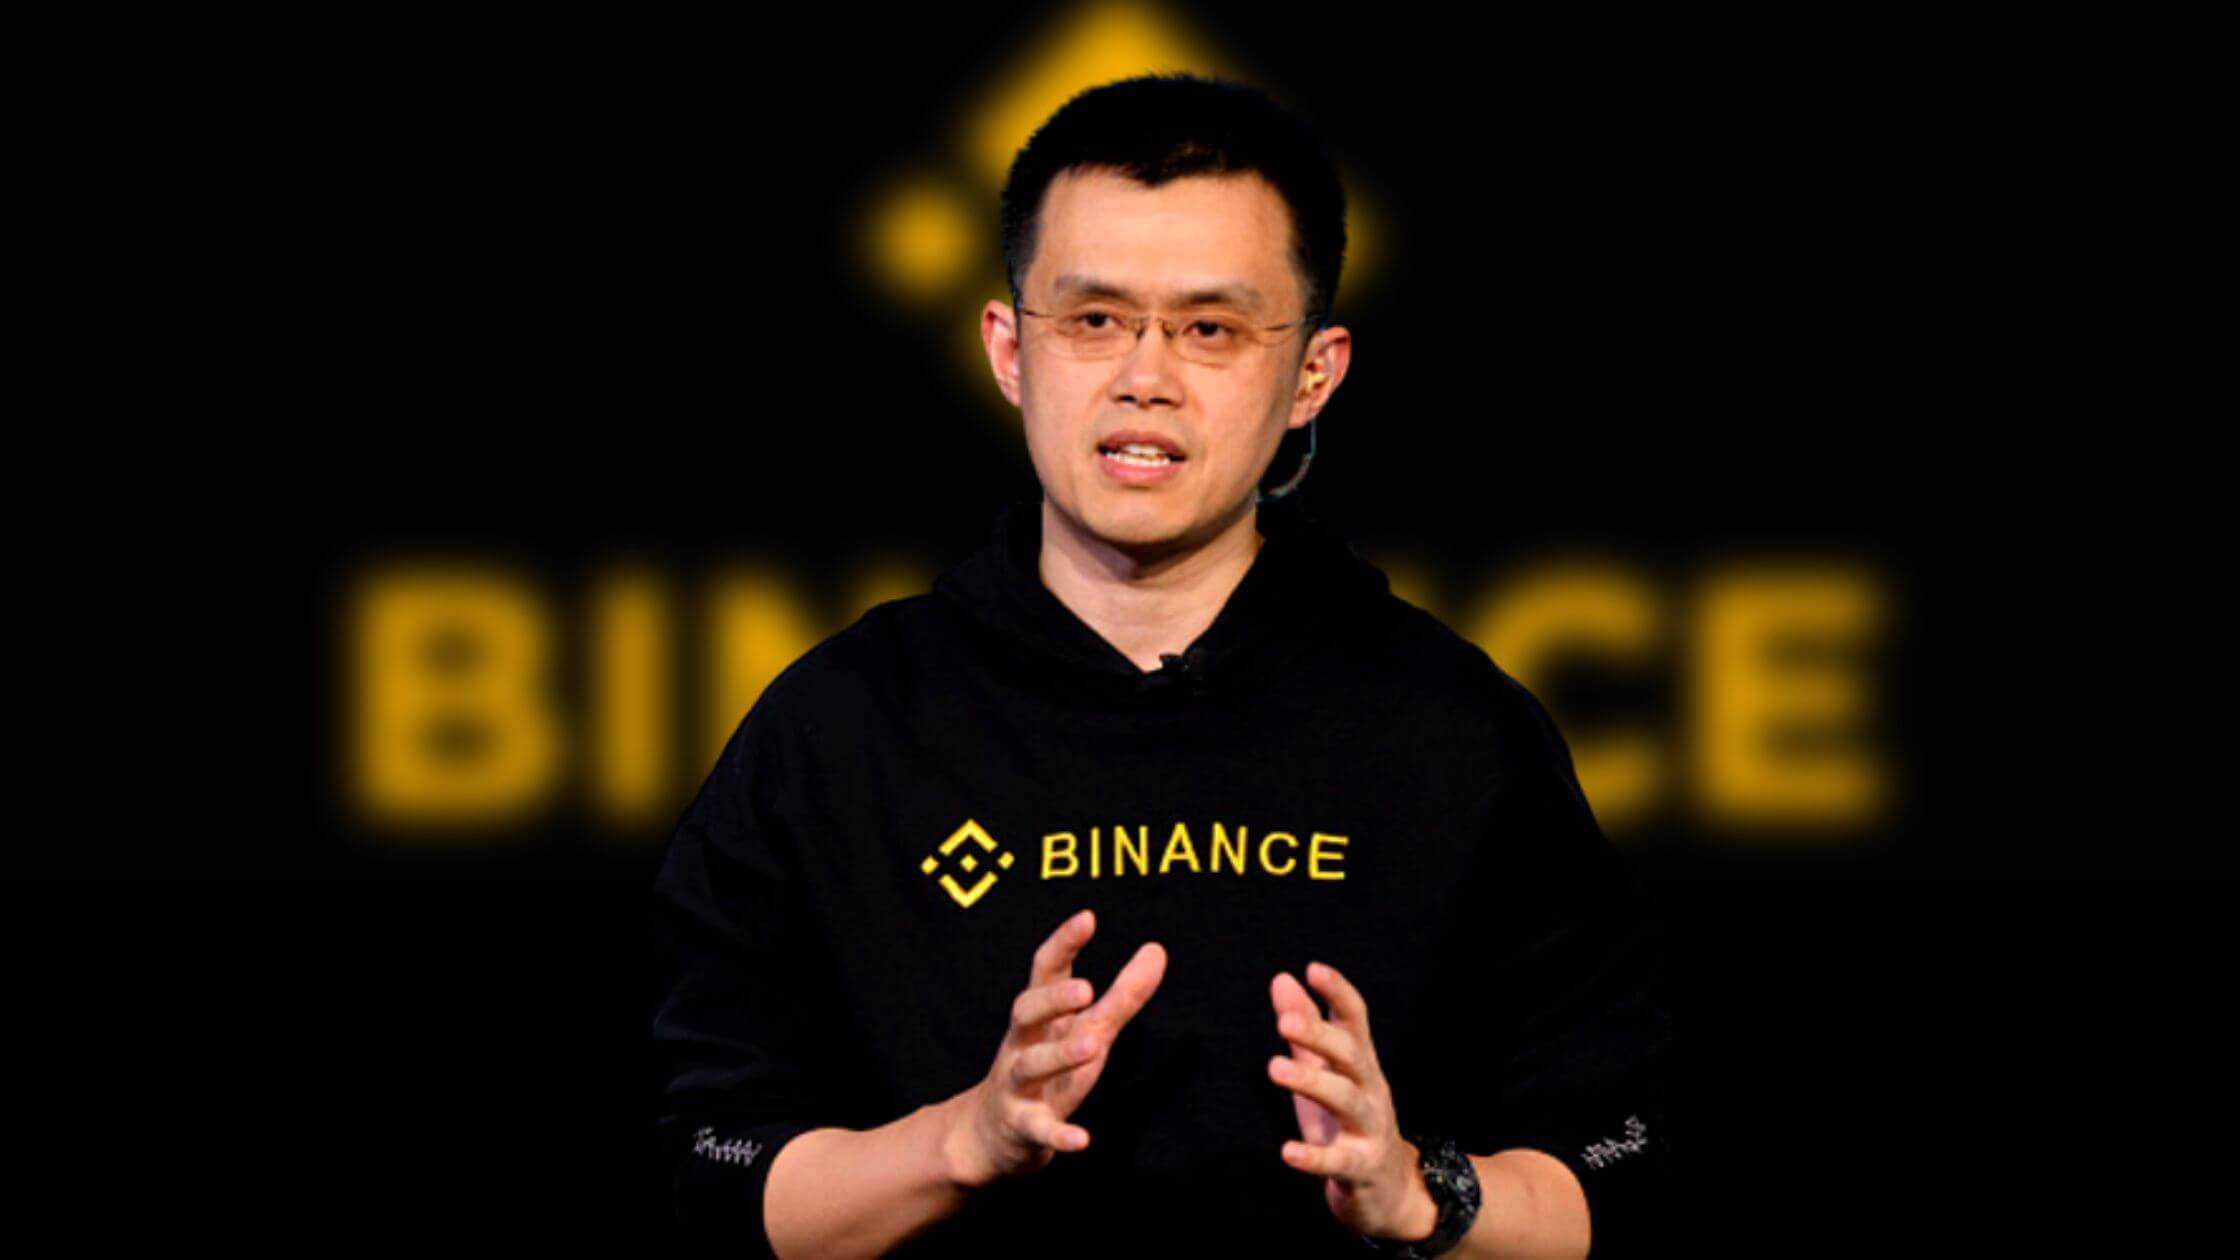 French Investors Have Filed A Lawsuit Against Binance For 2.4 Million Euros Losses